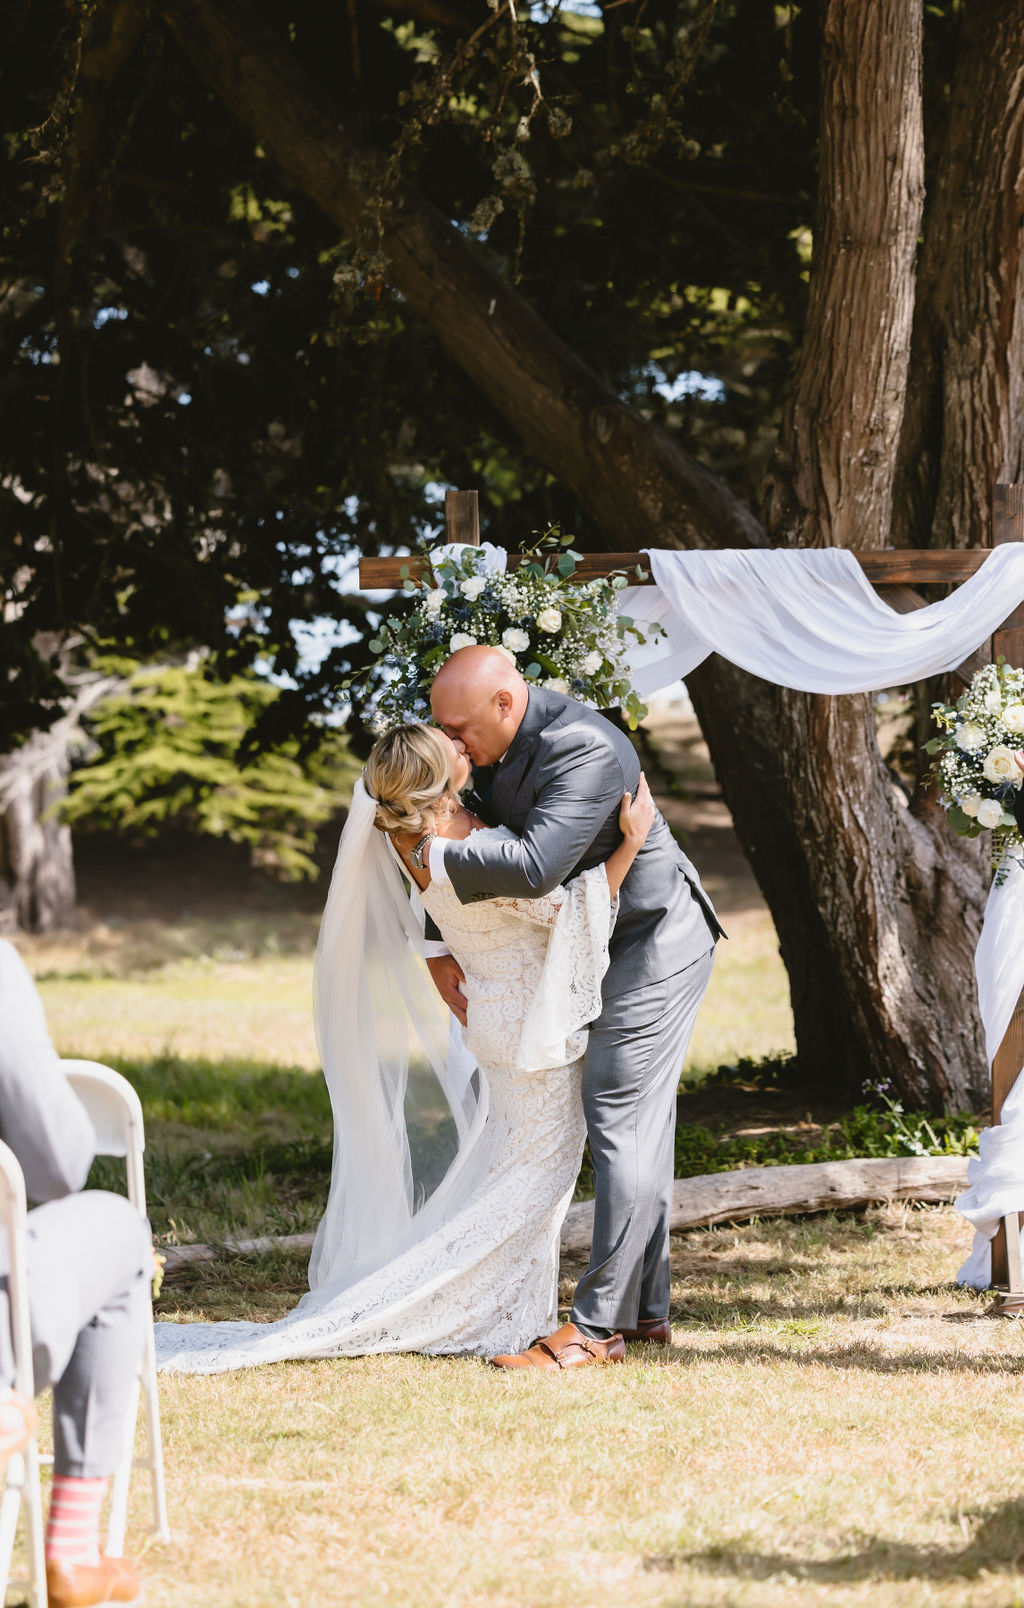 A Golden Hour & Romantic Beach Wedding Day At Oceanpoint Ranch